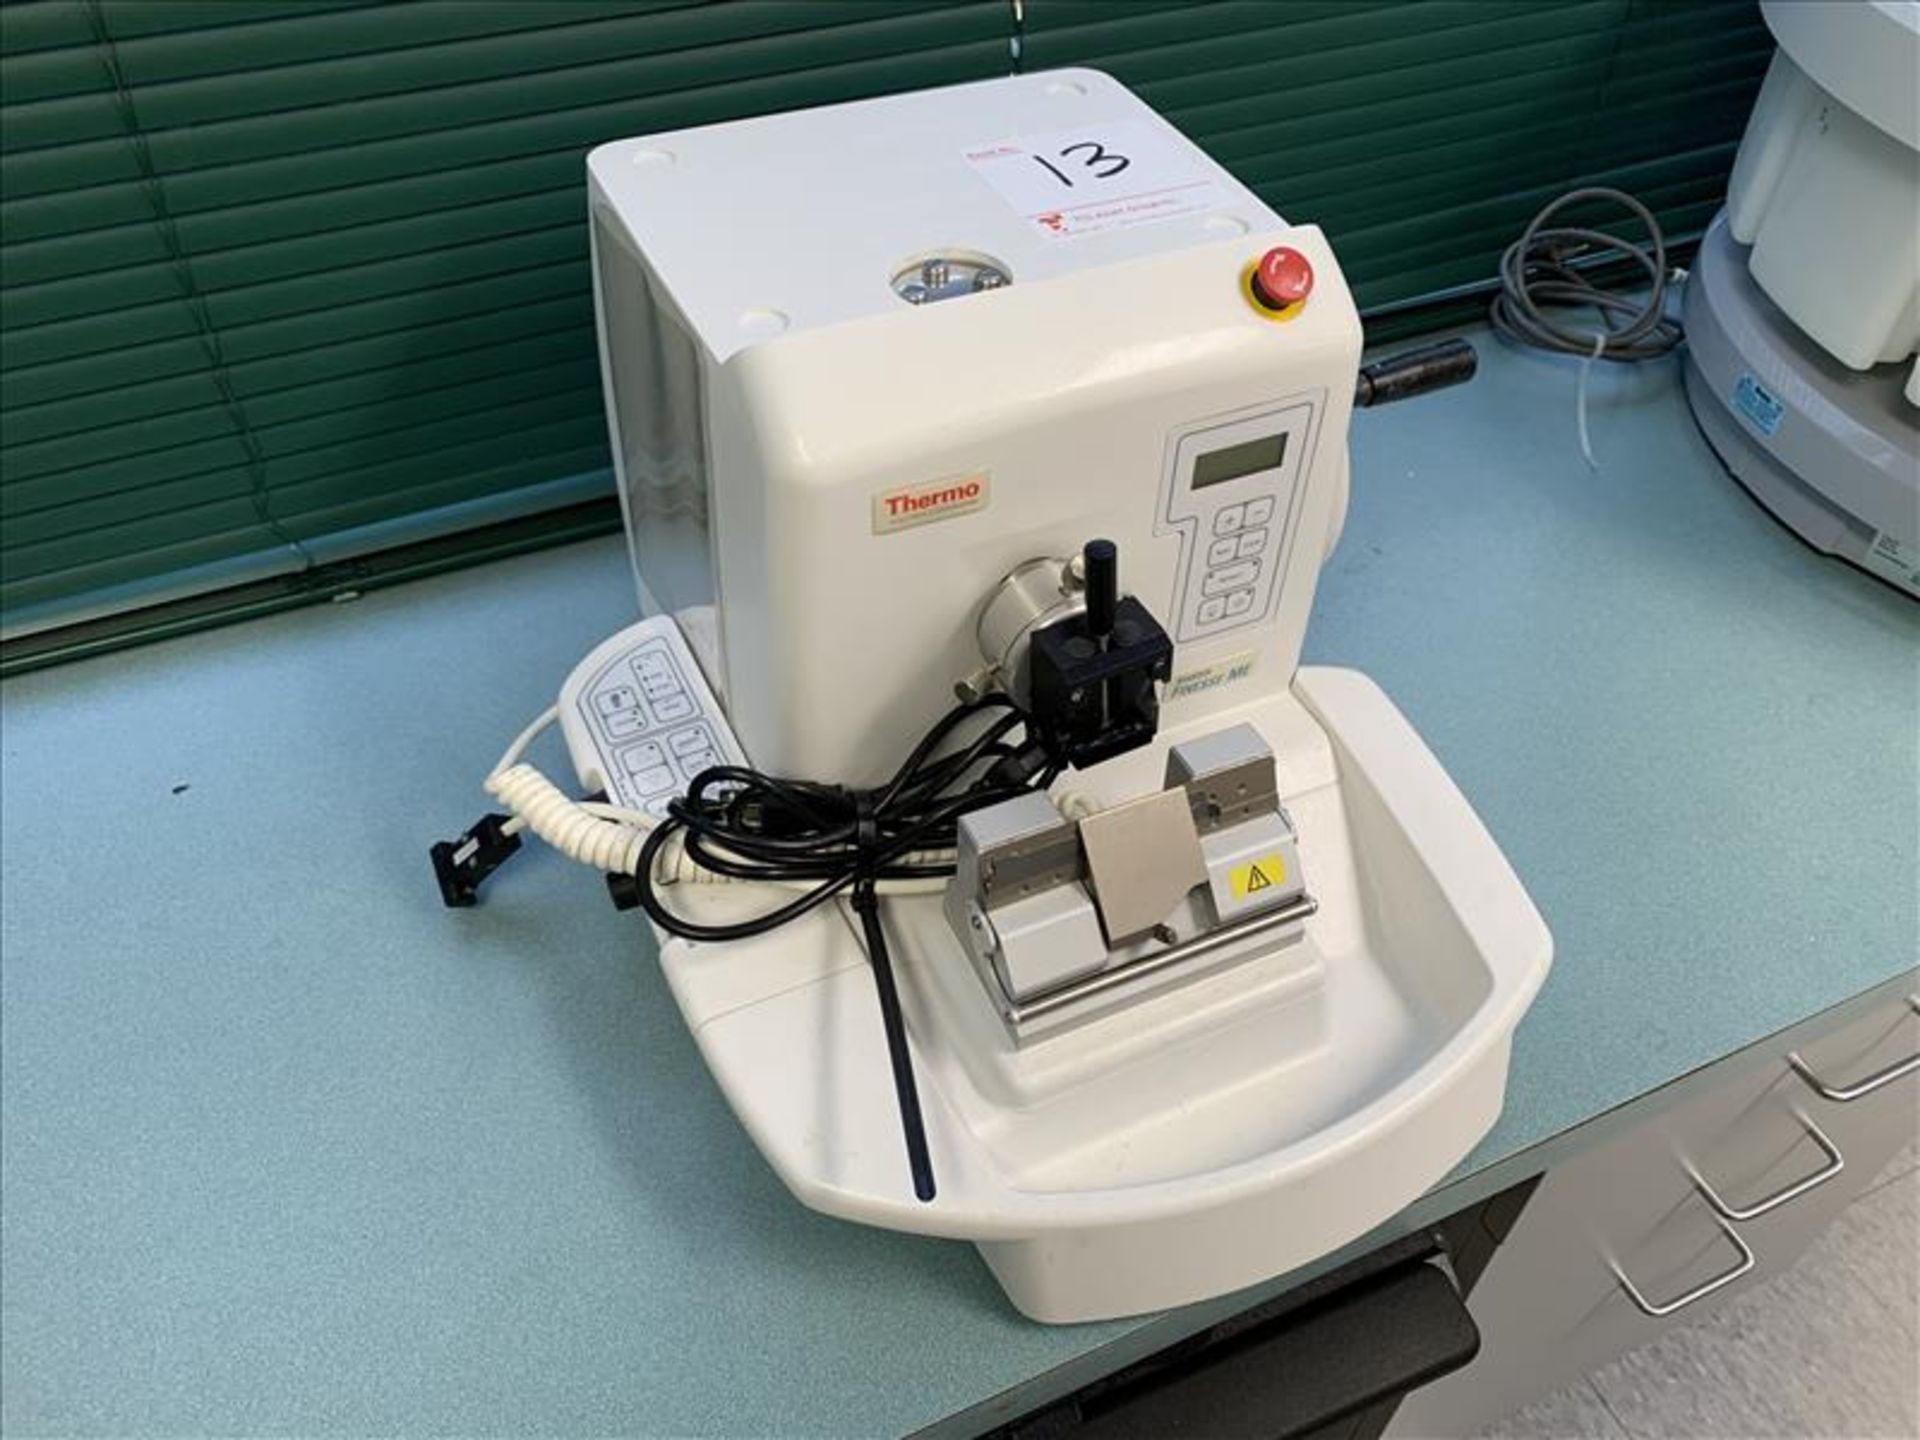 Thermo Electron Microtome, Blade mod. Shandon Finesse ME S/N FN1556A0412